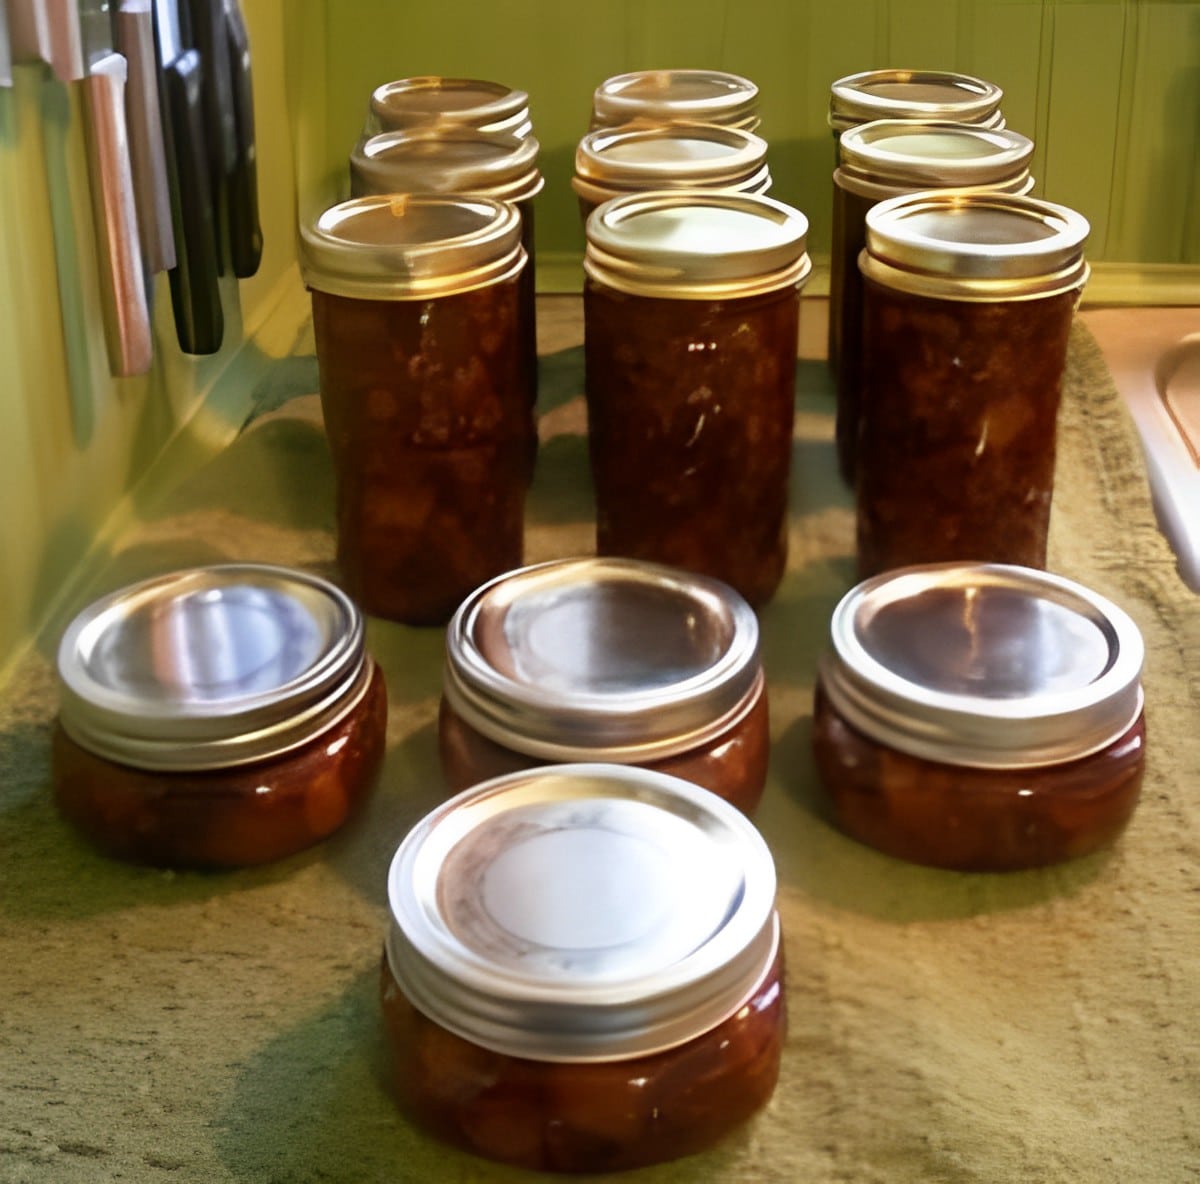 Spicy pear chutney canned in glass jars.